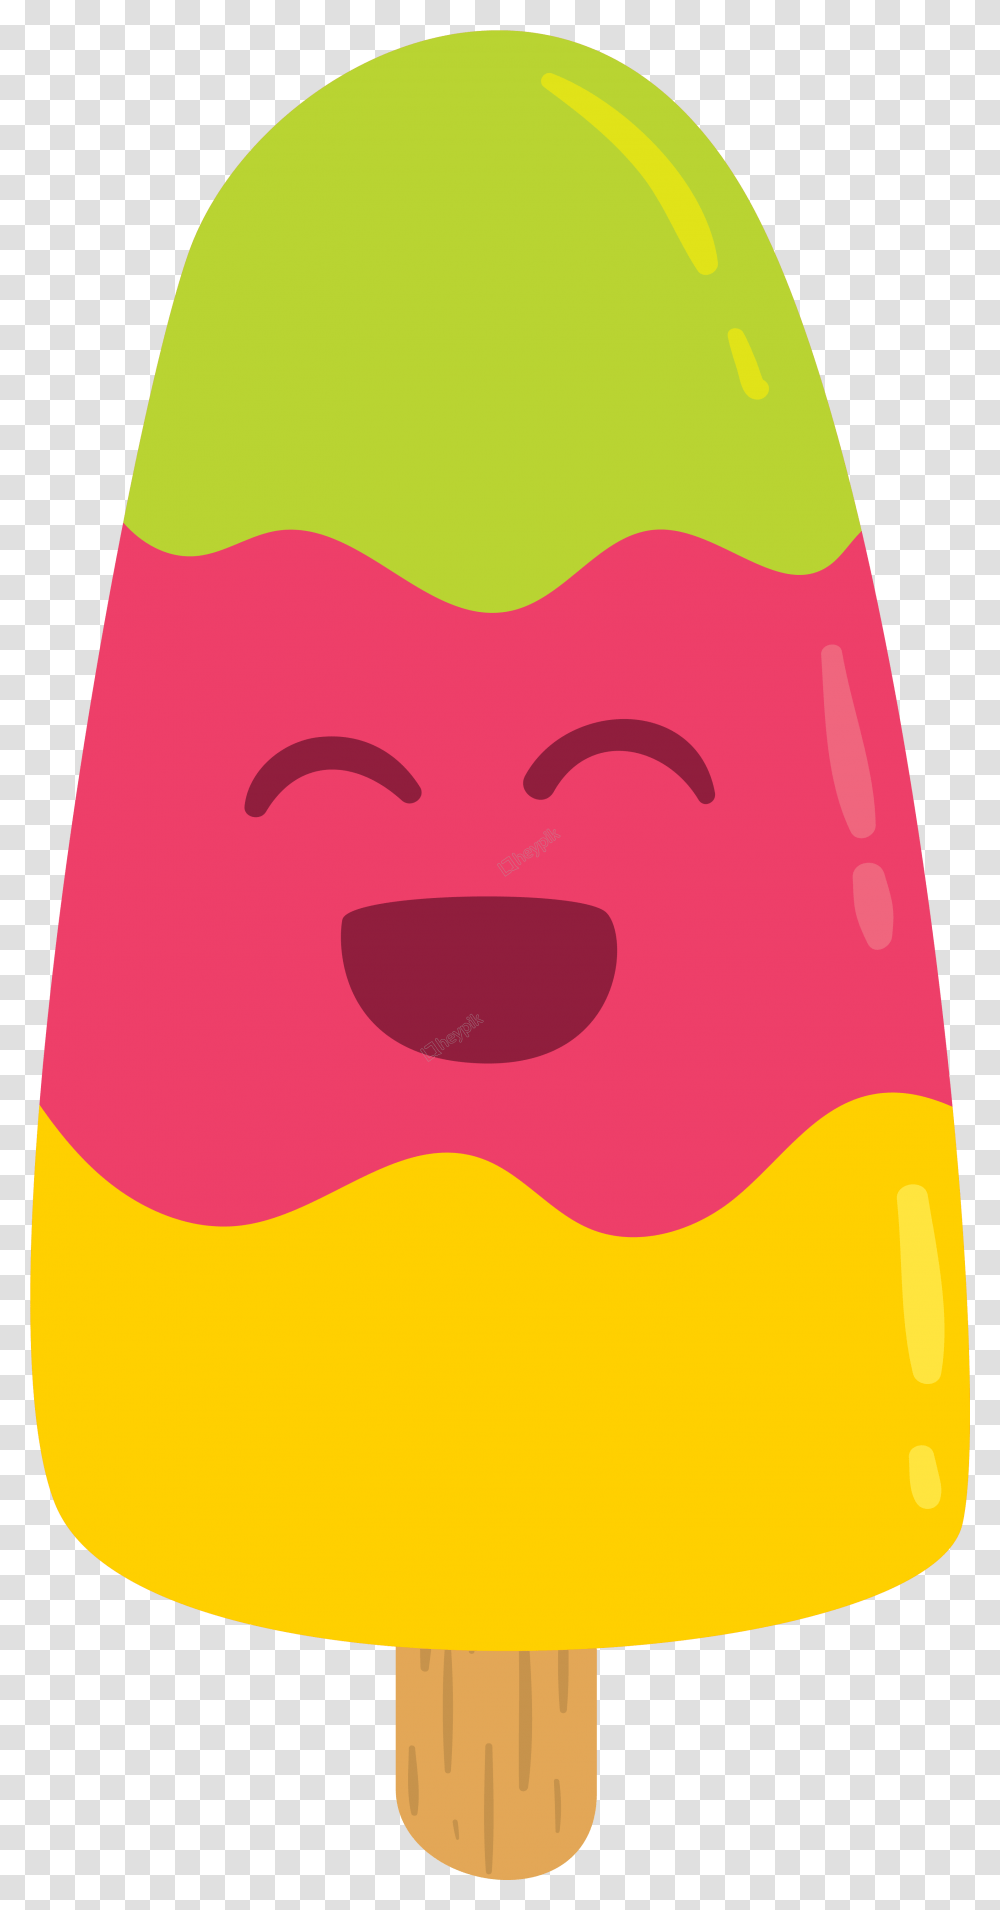 Painted Cartoon Multicolored Popsicles Free Download, Mouth, Lip, Baseball Cap, Hat Transparent Png